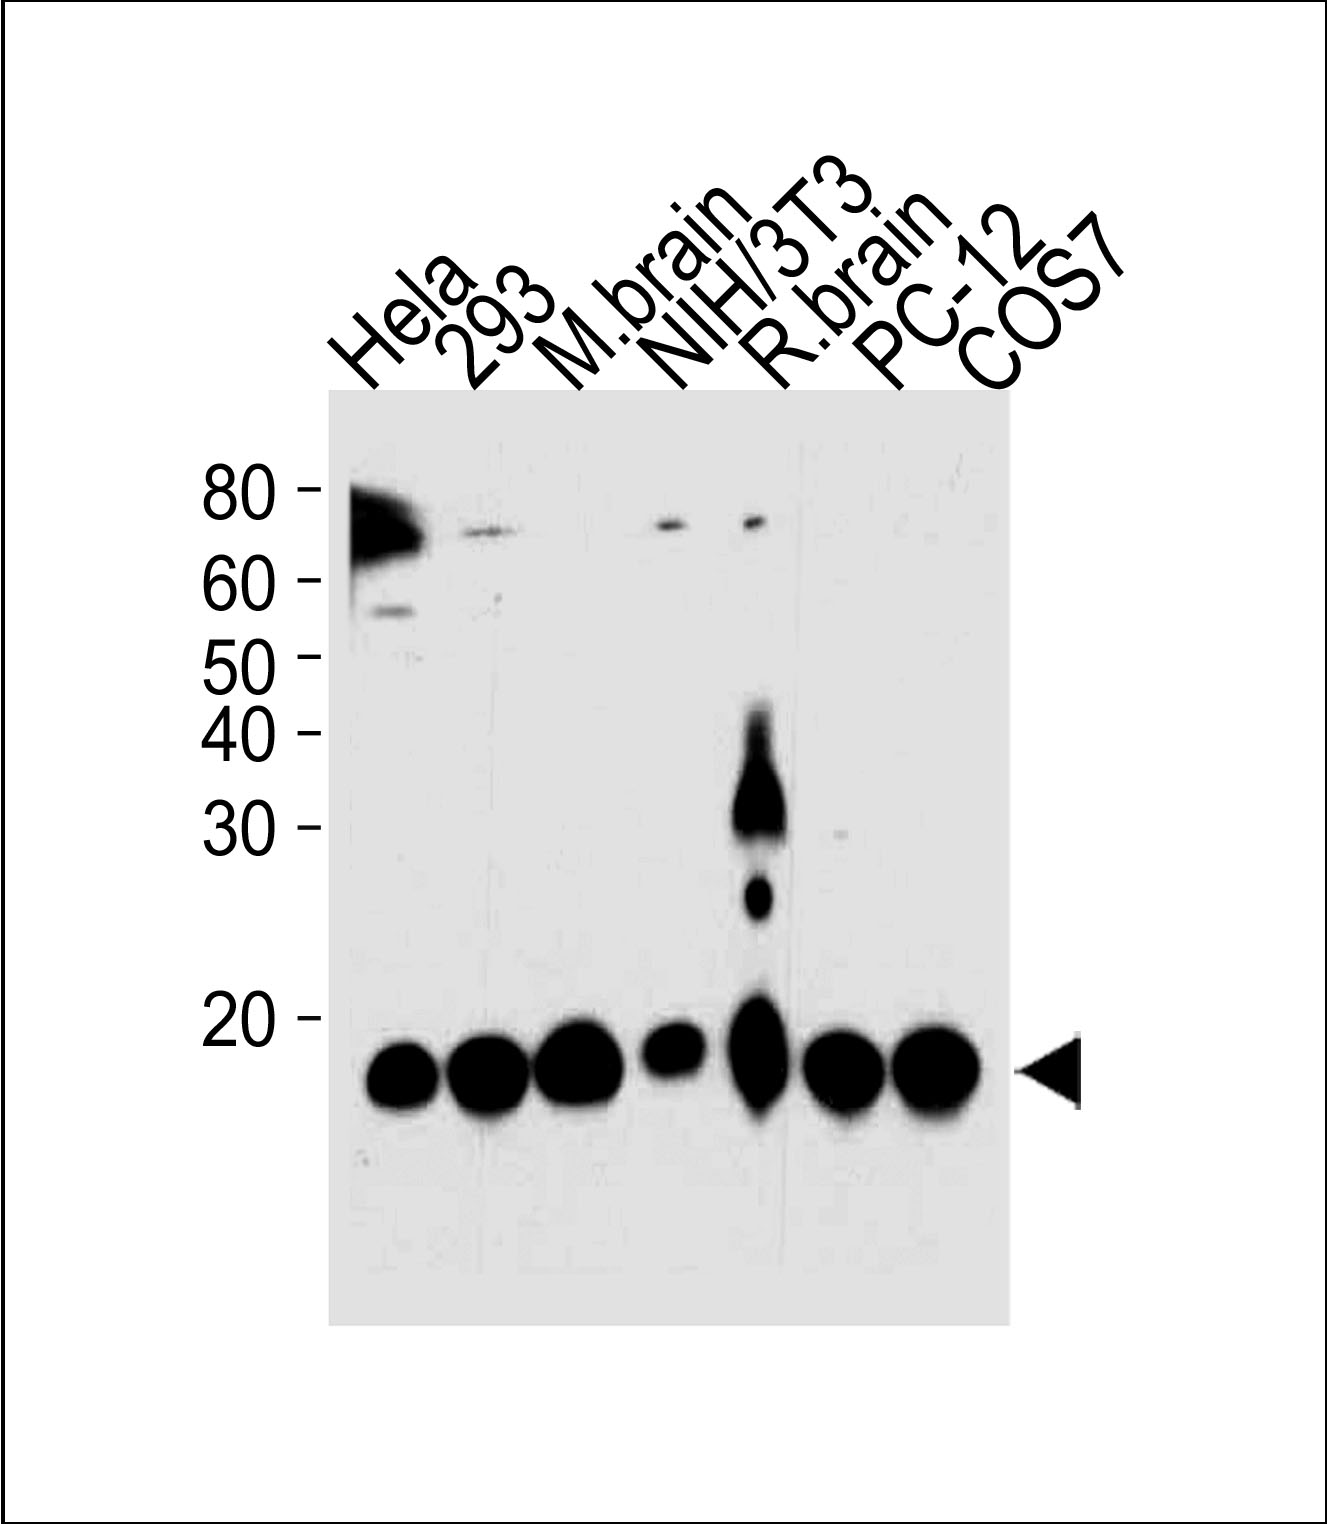 PIN1 Antibody (Cat. #AM2212b) western blot analysis in Hela,293,mouse NIH/3T3,PC-12,COS-7 cell line and mouse brain,rat brain tissue lysates (35?g/lane).This demonstrates the PIN1 antibody detected the PIN1 protein (arrow).